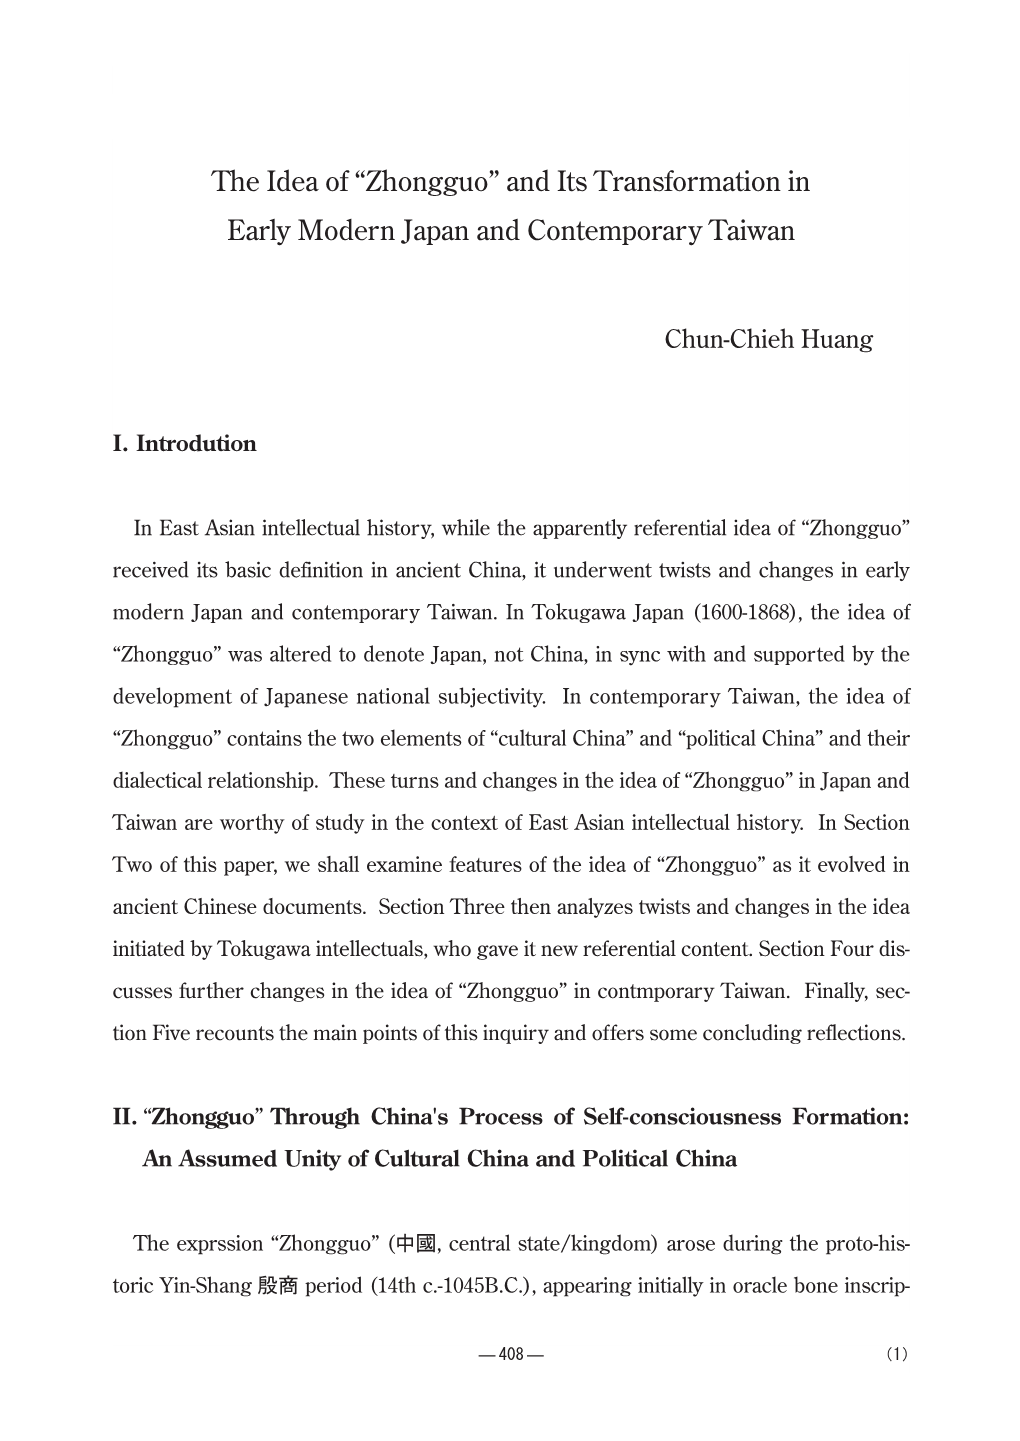 The Idea of “Zhongguo” and Its Transformation in Early Modern Japan and Contemporary Taiwan